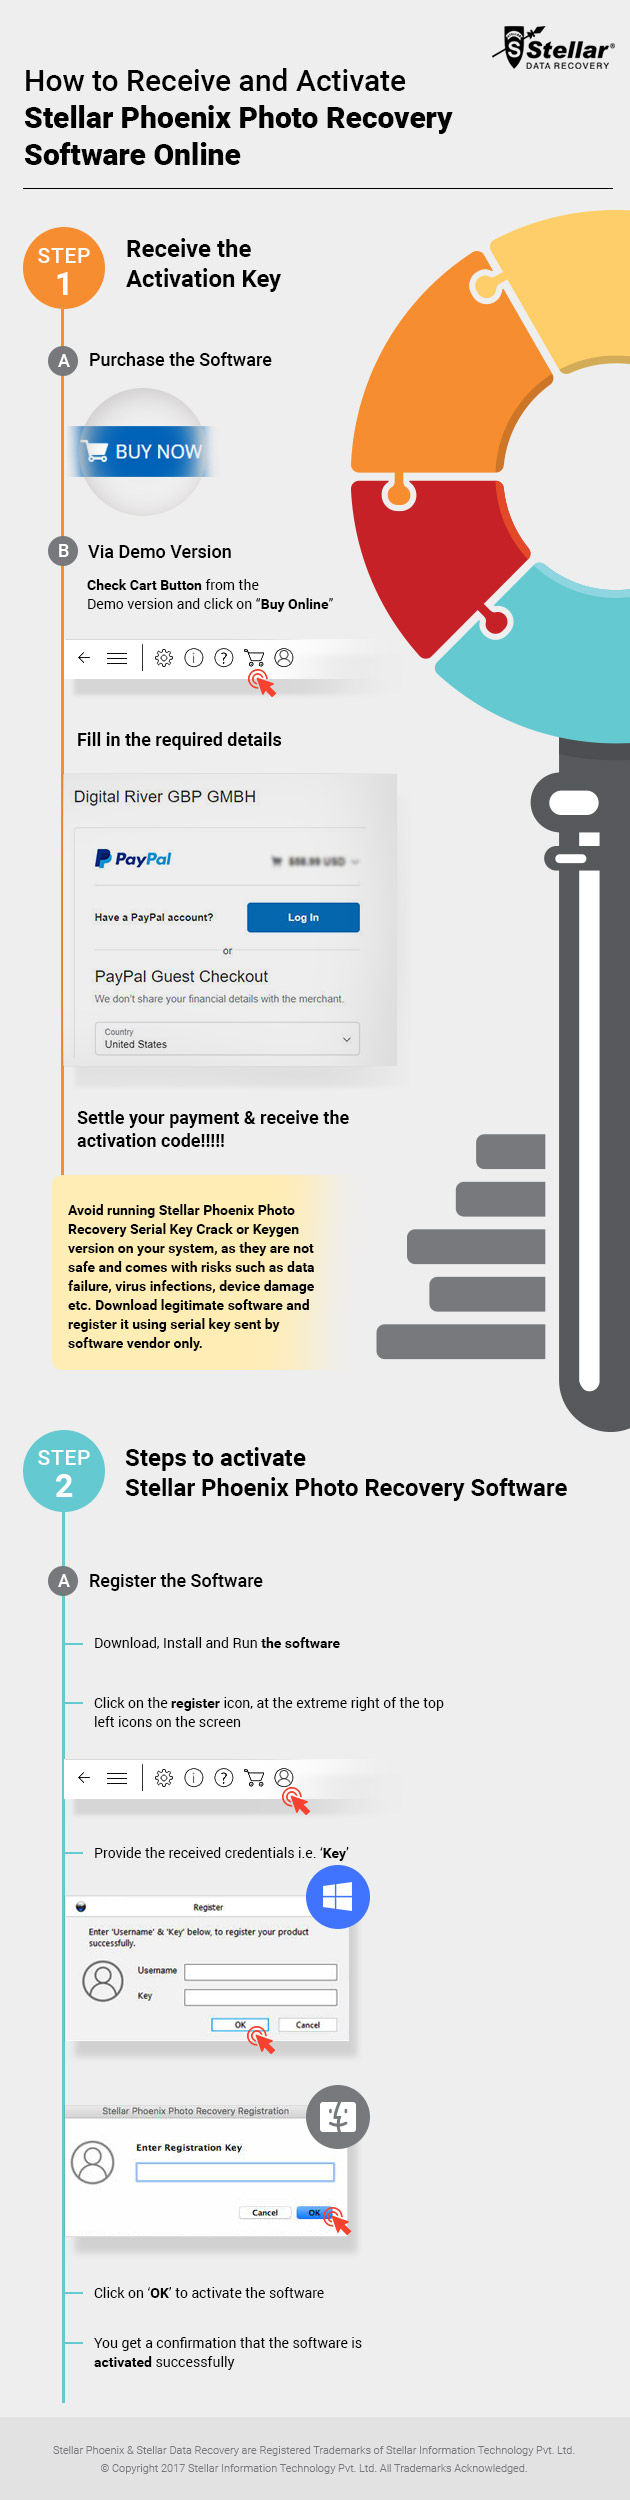 stellar photo recovery 9 activation key